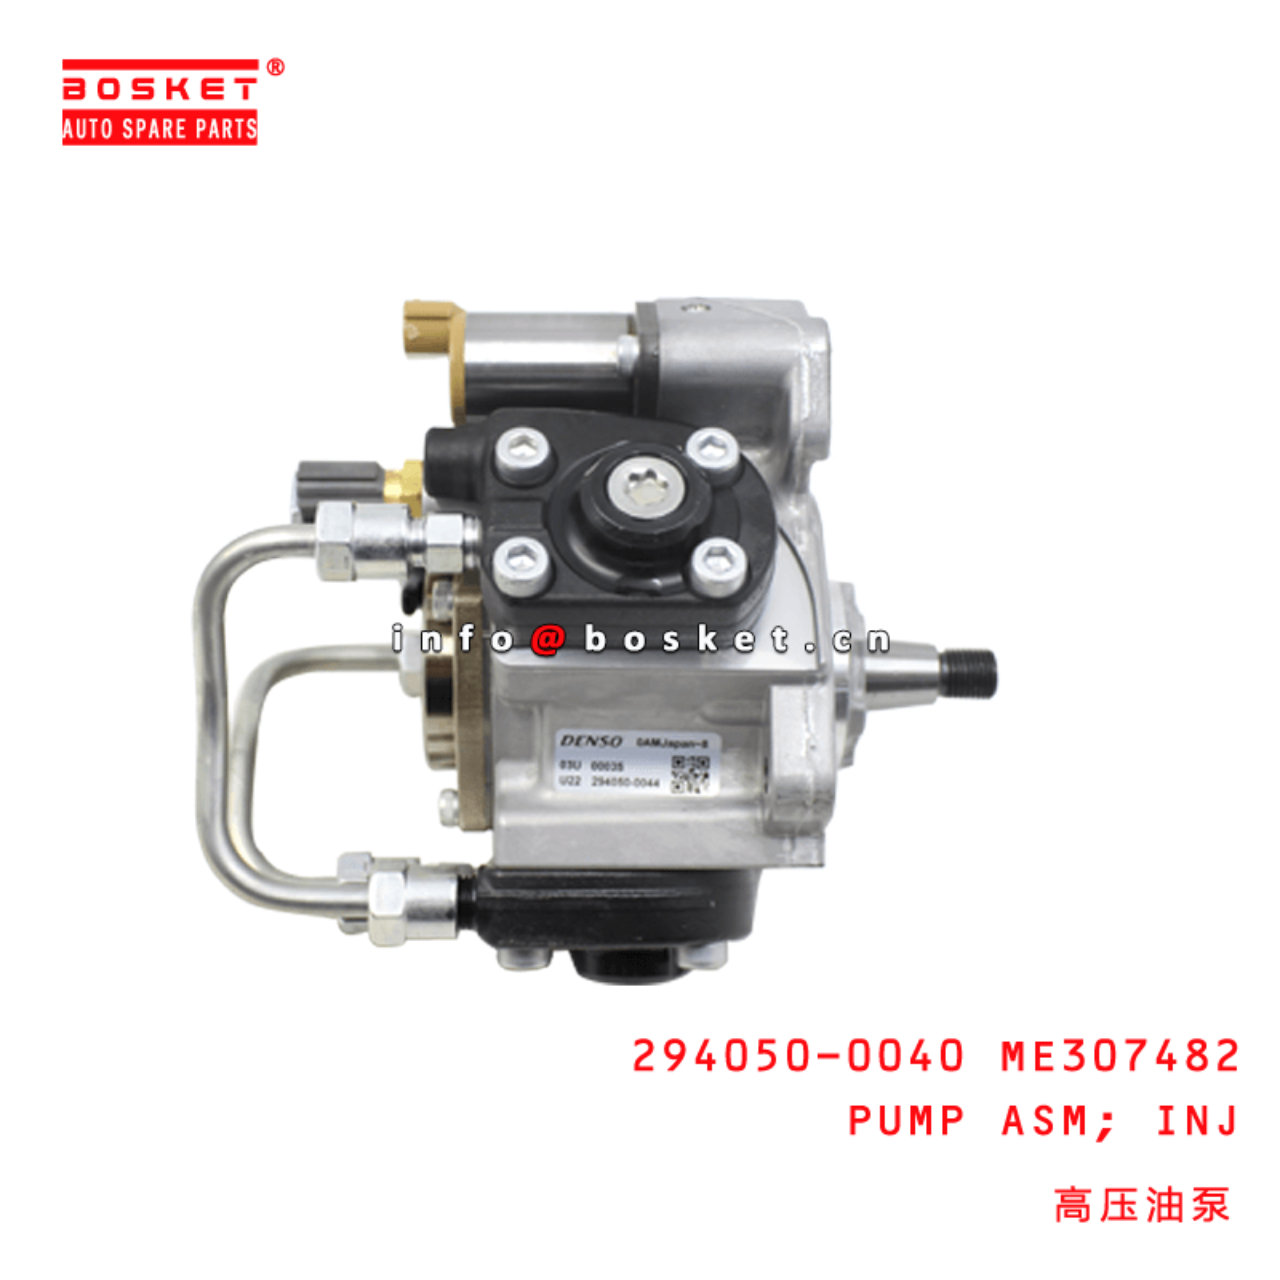 294050-0040 ME307482 Injection Pump Assembly Suitable For MITSUBISHI FUSO 